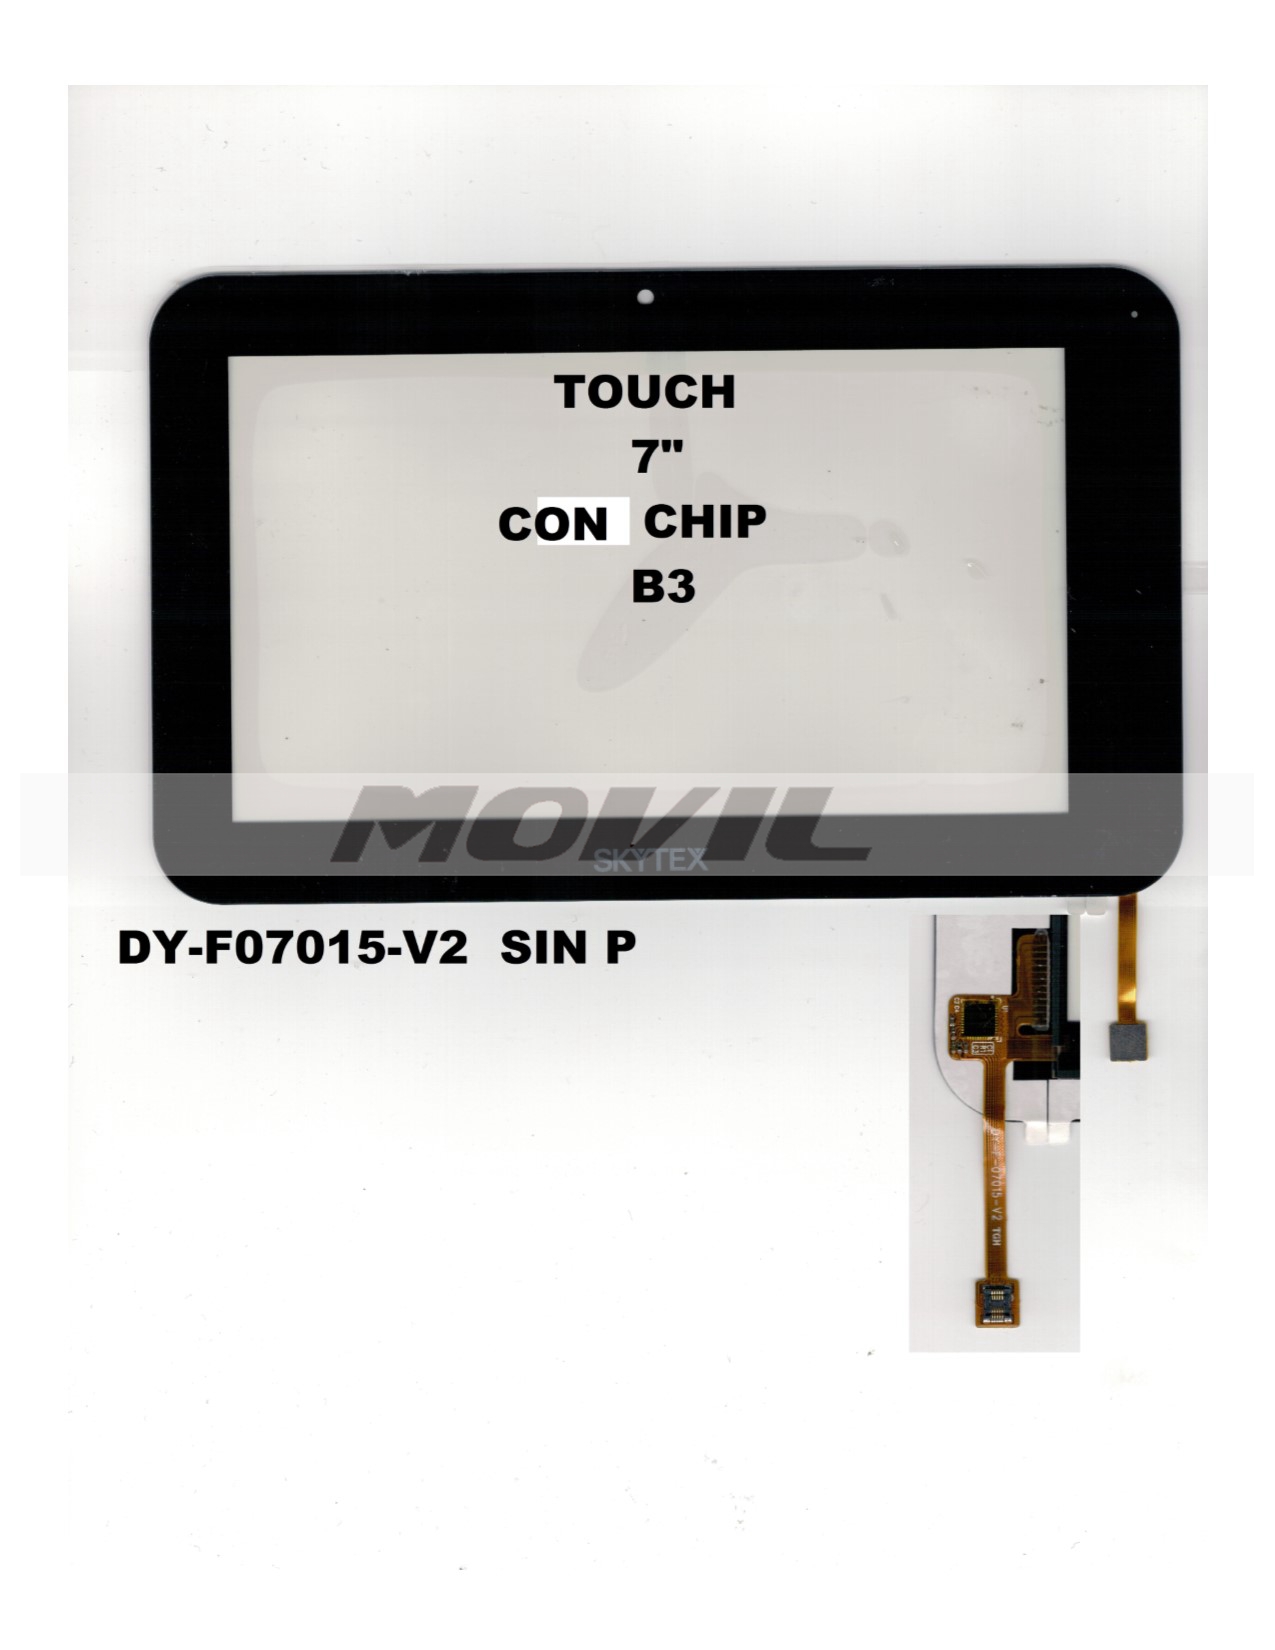 Touch tactil para tablet flex 7 inch CON CHIP B3 DY-F07015-V2 SIN P